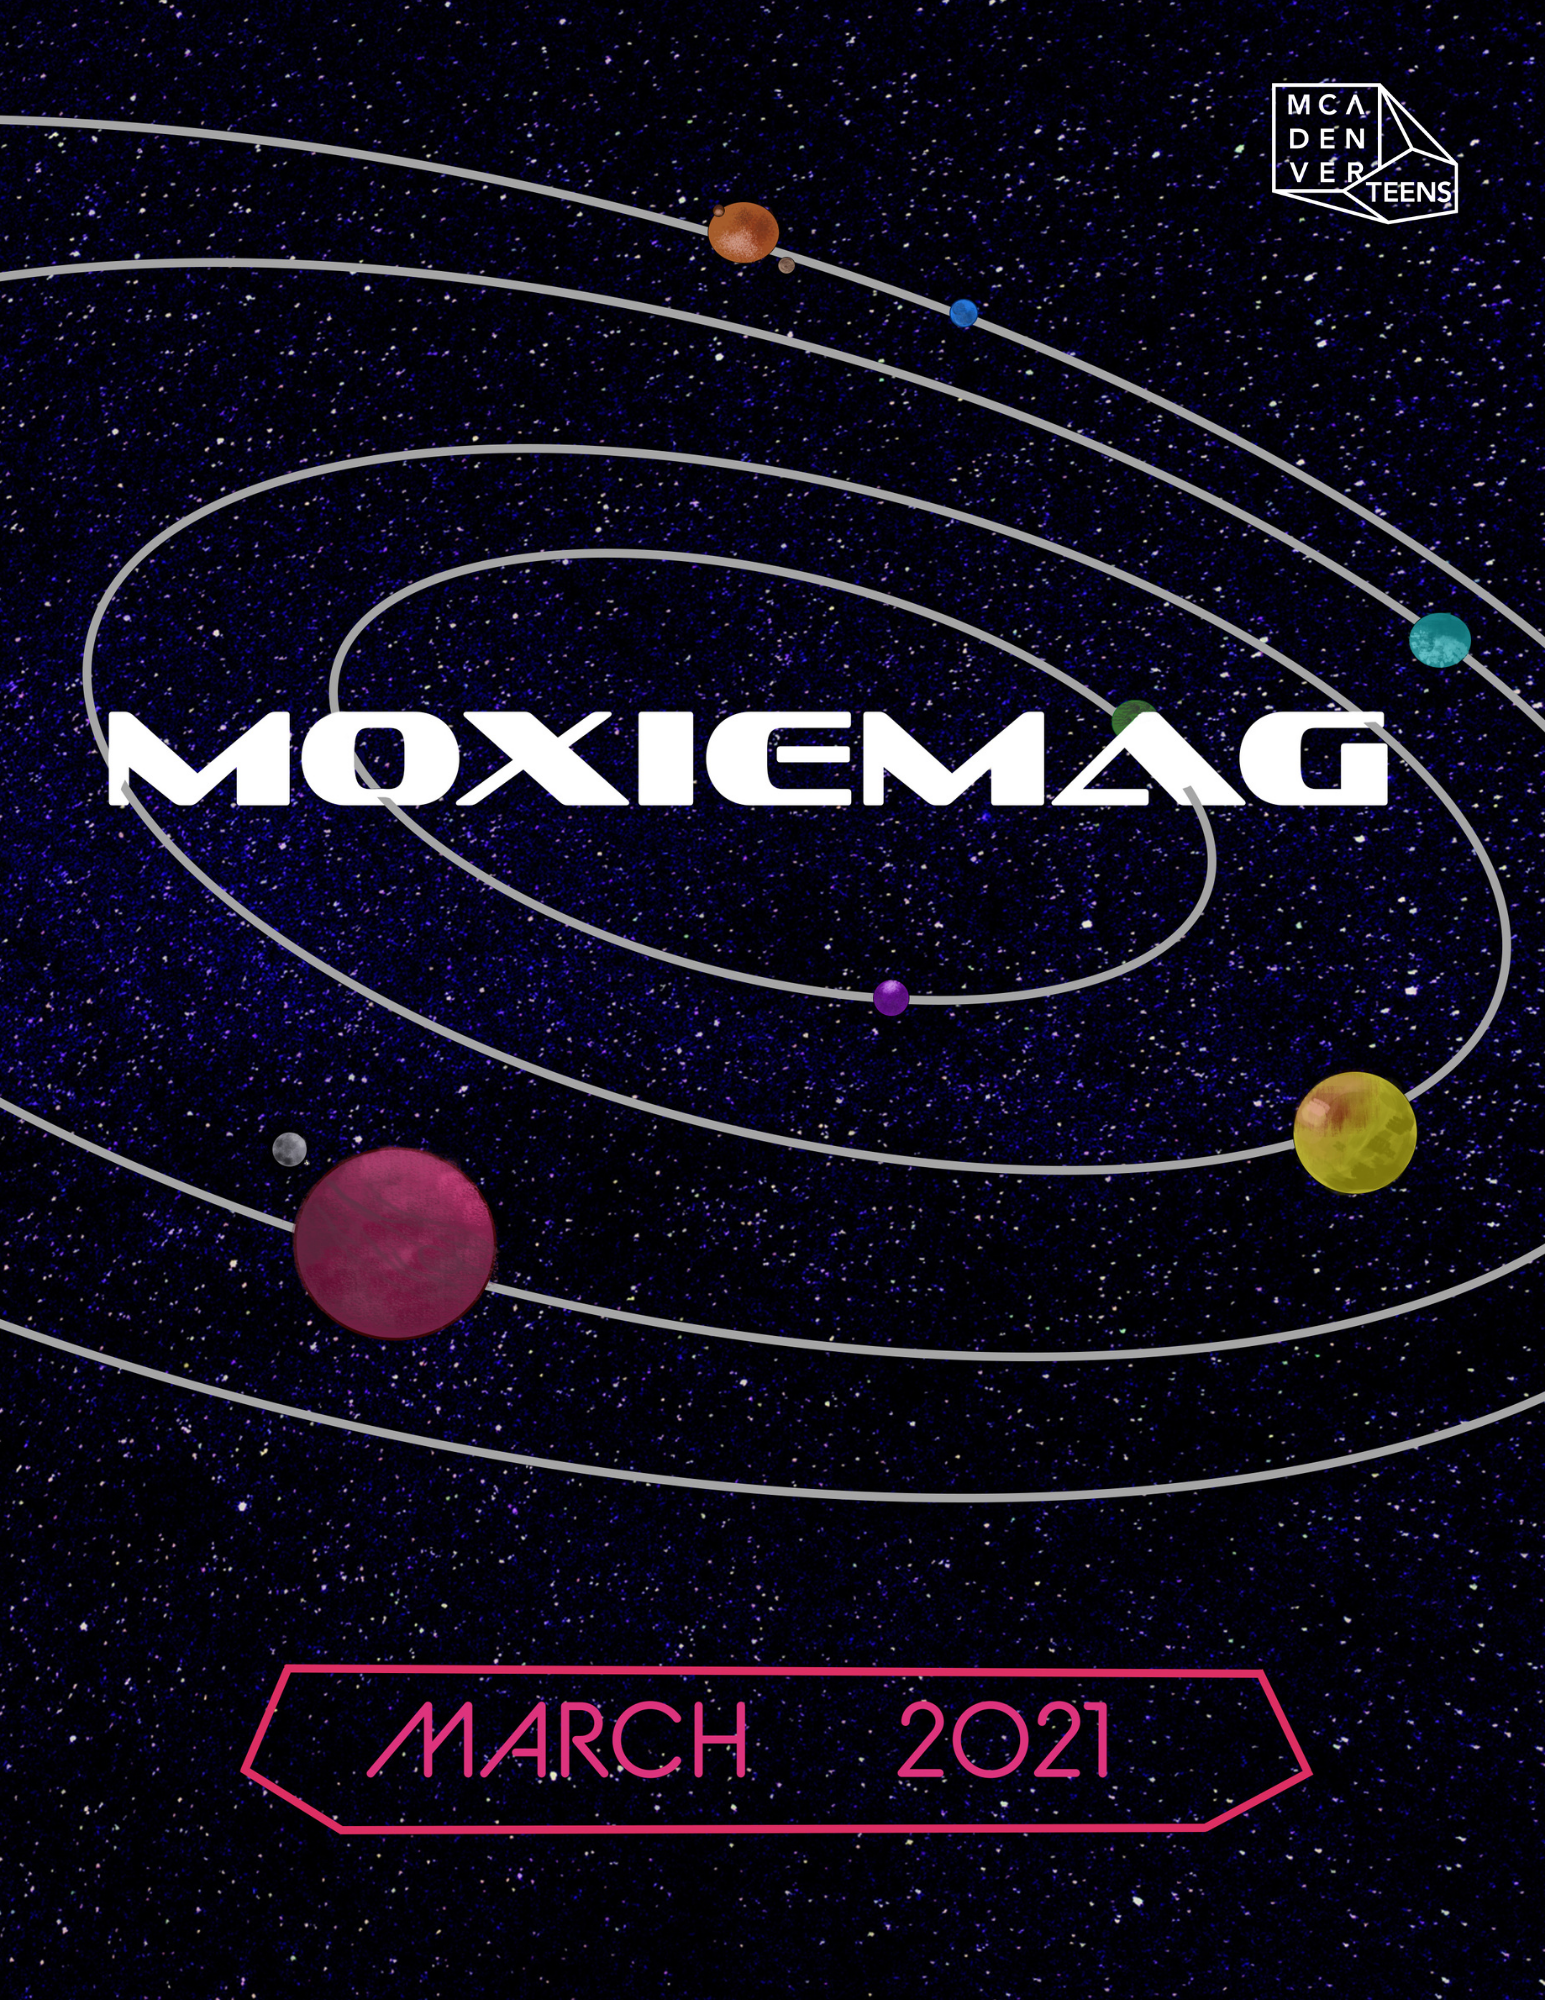 MoxieMag March 2021 issue with an image of outer space as the cover. The image also shows the a graphic of the solar system, which displays four silver rings and planets that orbit the center of the image. In the center of the image is white text that reads “MoxieMag” in all capital letters. The bottom of the cover reads “March 2021” in pink text.